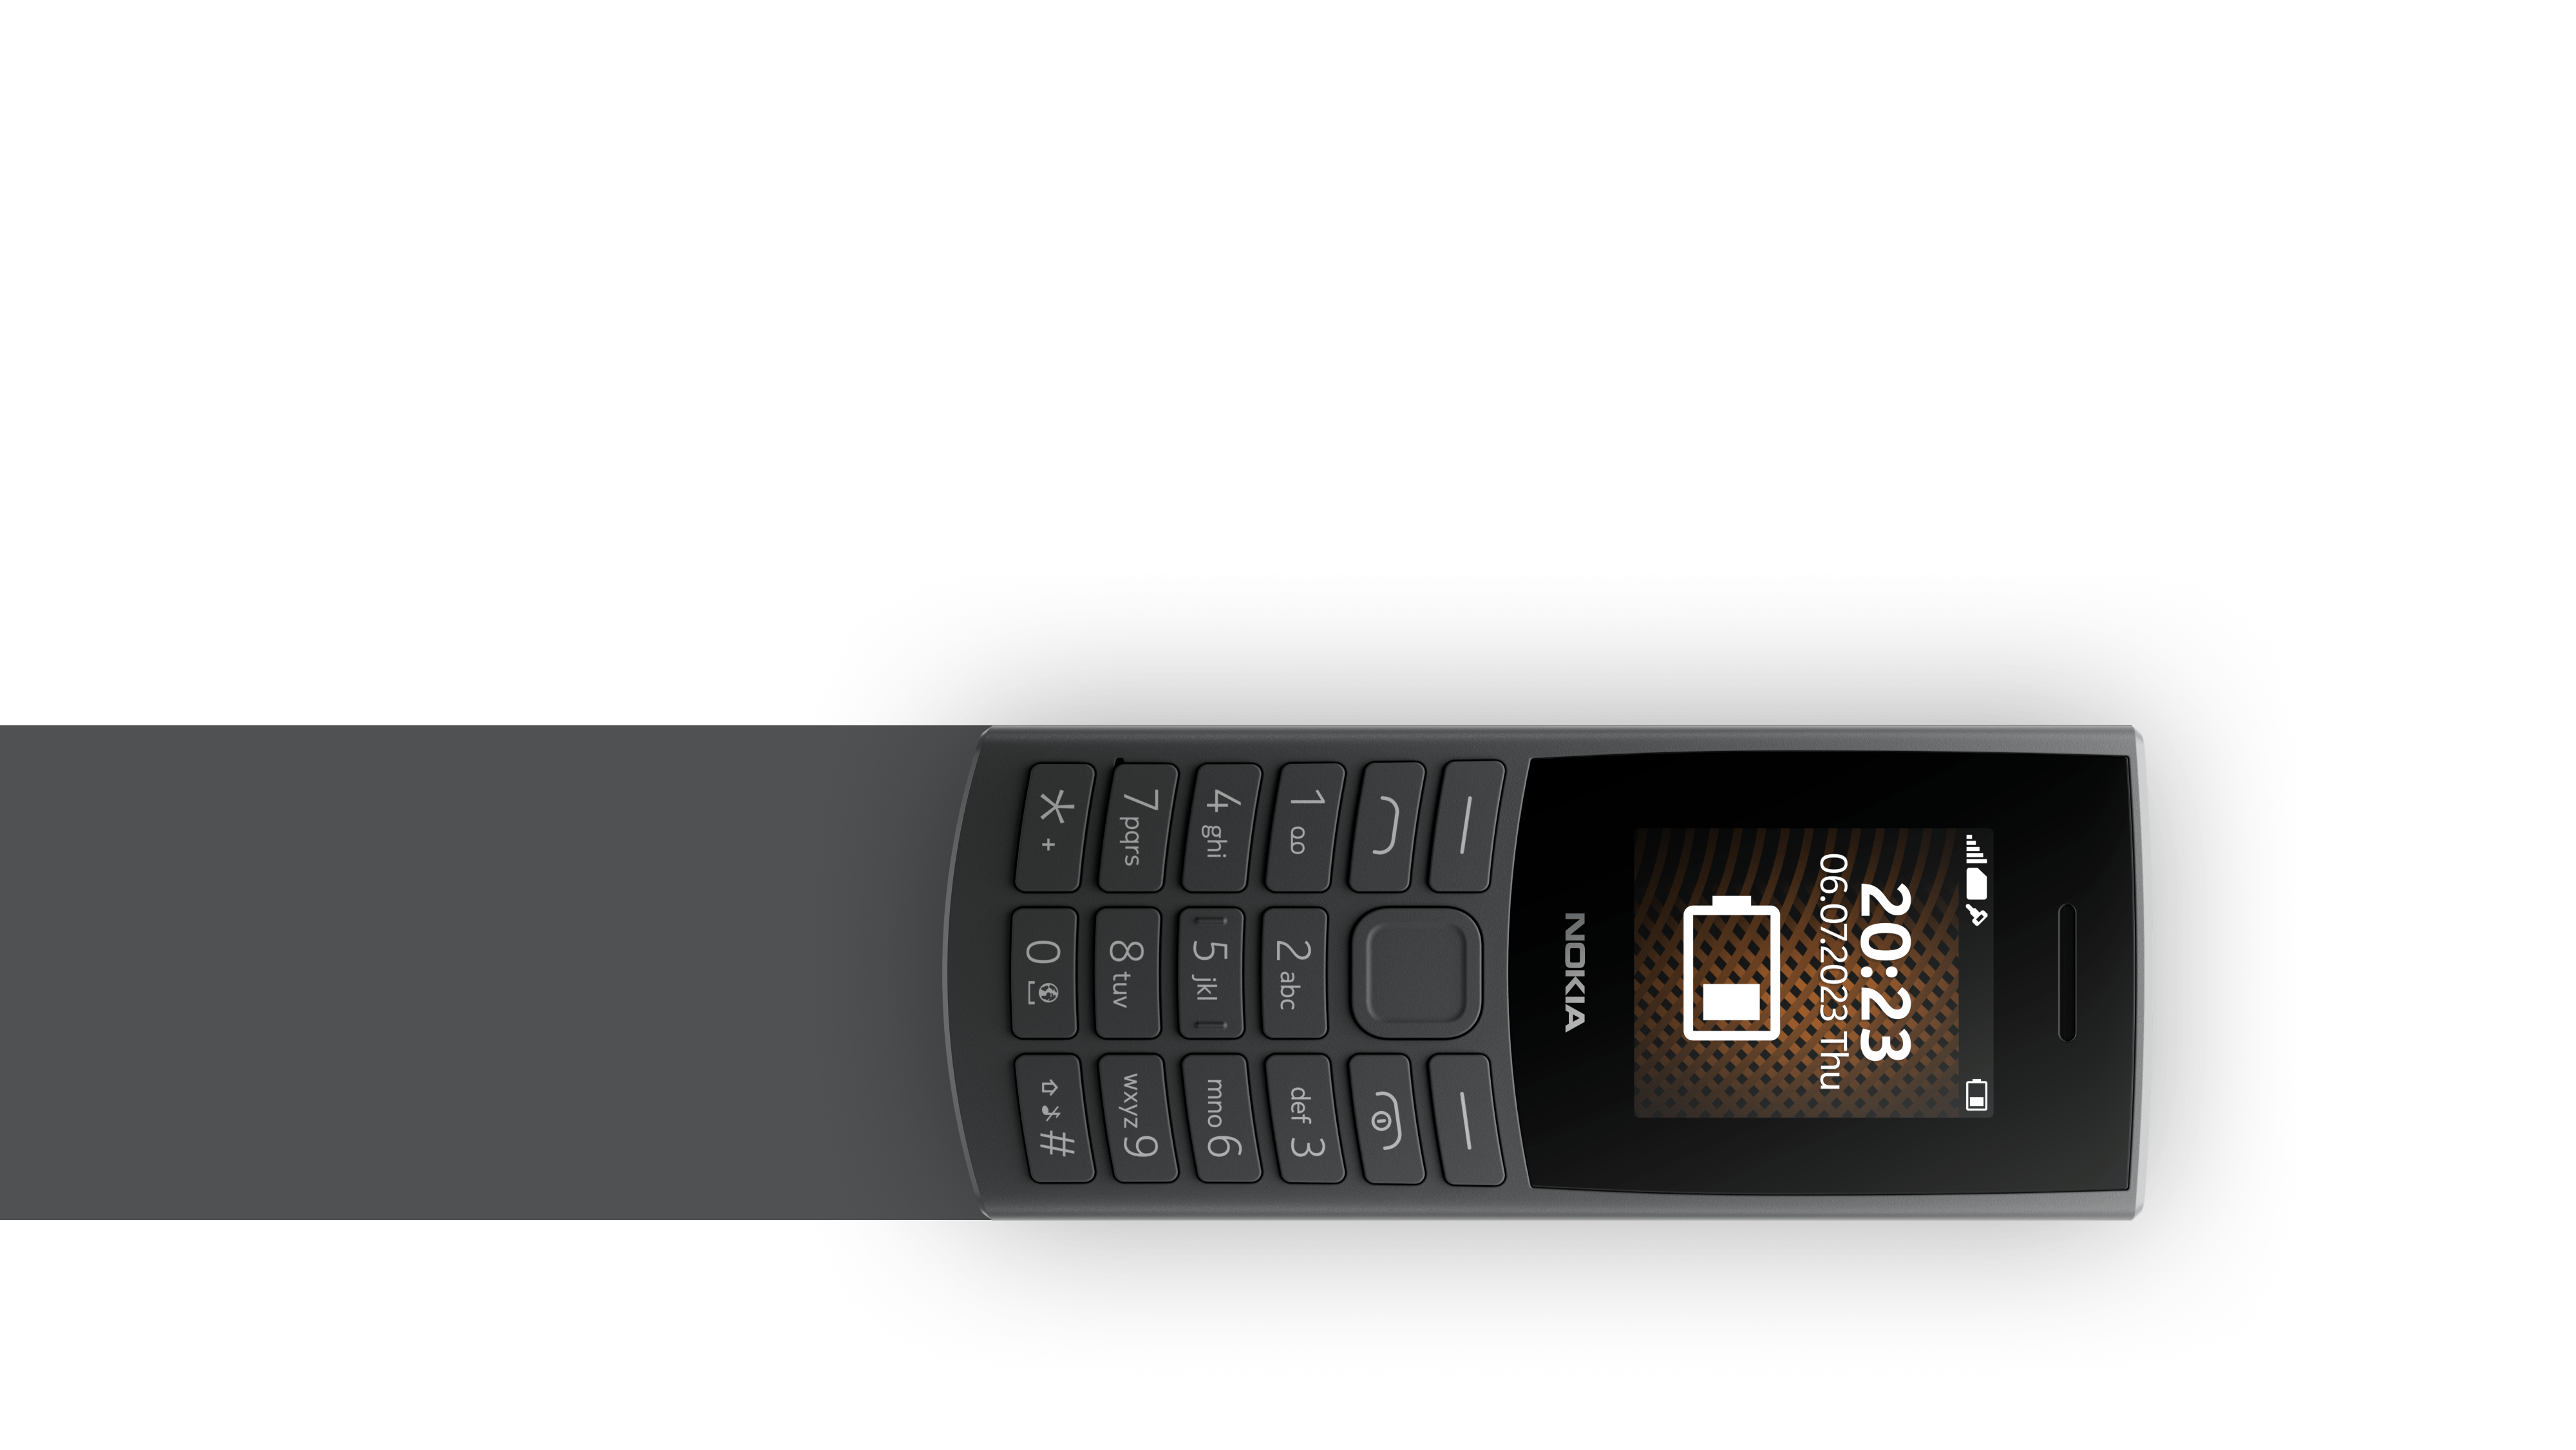 Nokia internet 105 4G with phone feature